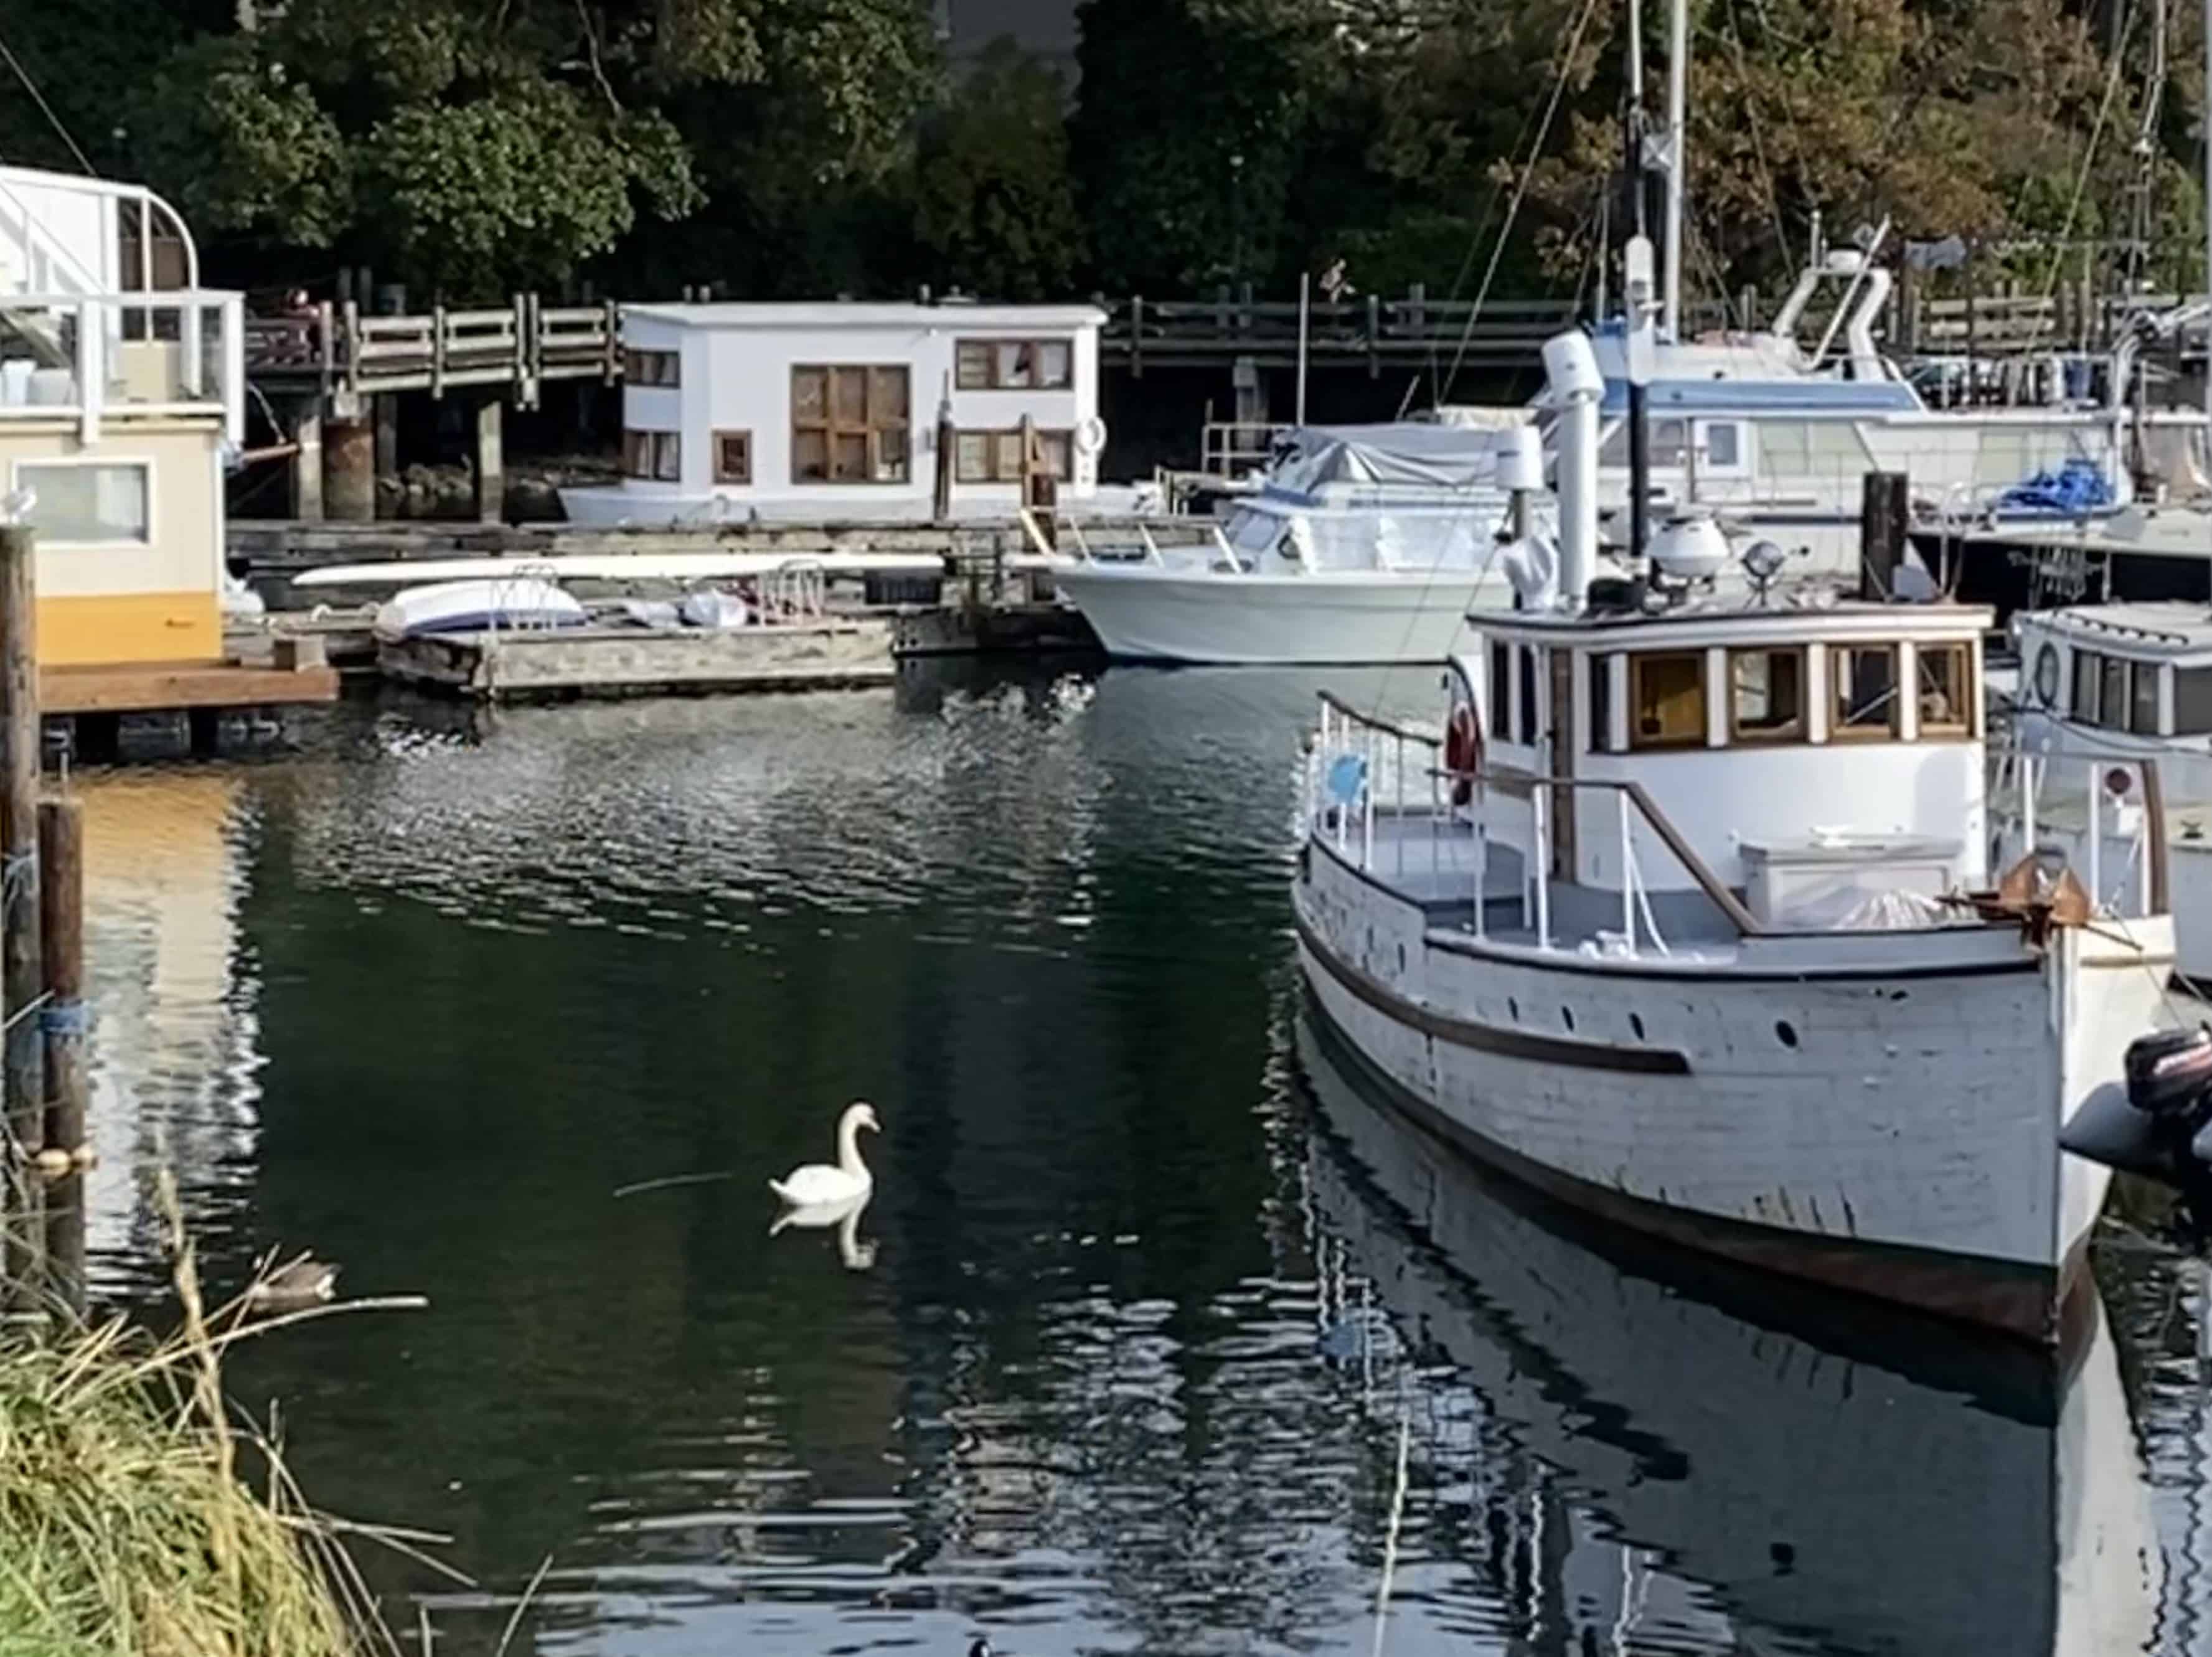 Captain Jacobsen Park often attracts swans like this one due to the calmness in the marina.